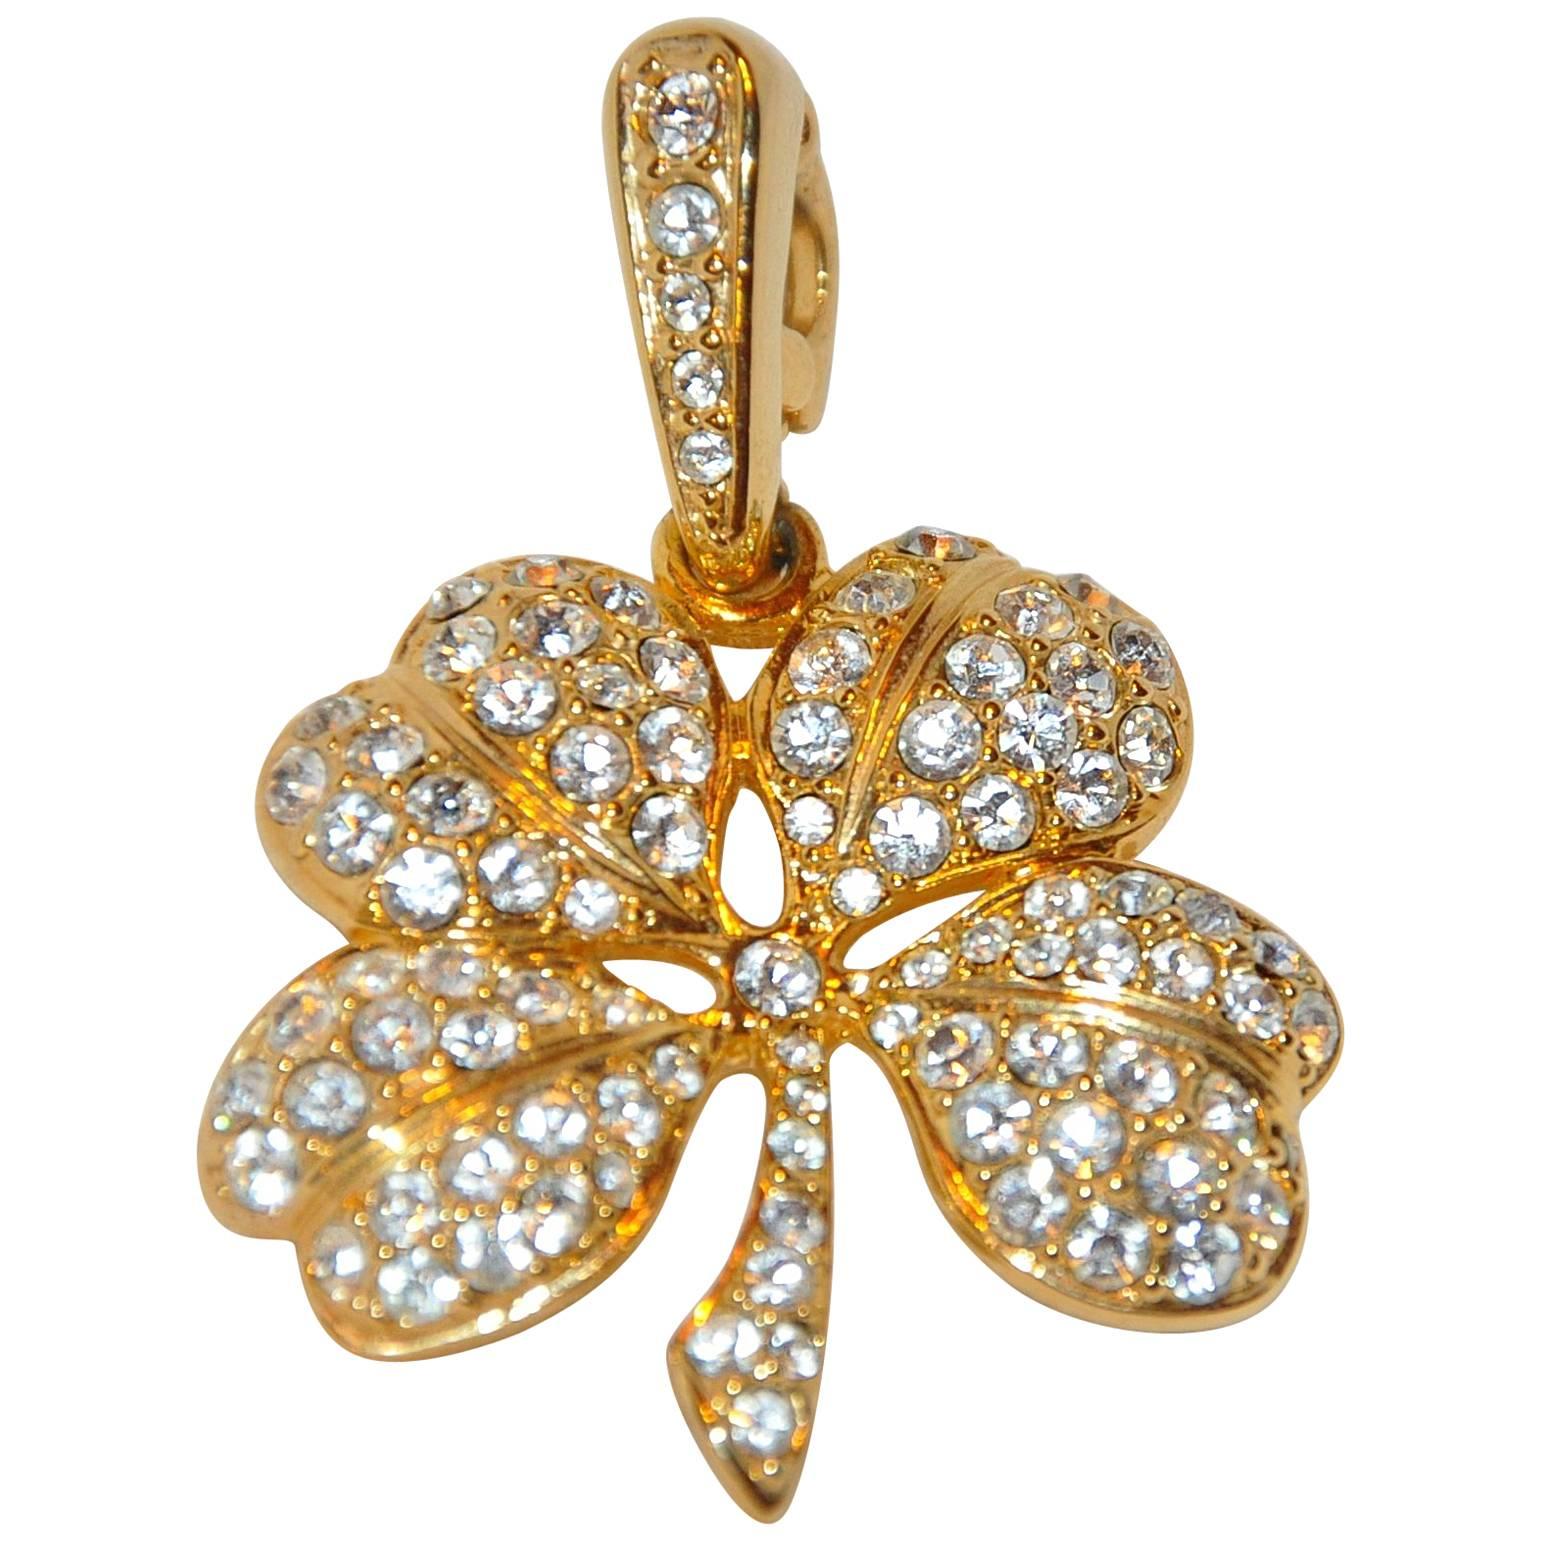 Kenneth Jay Lane "Lucky Clover" Faux Diamonds Encrusted Pendant For Sale